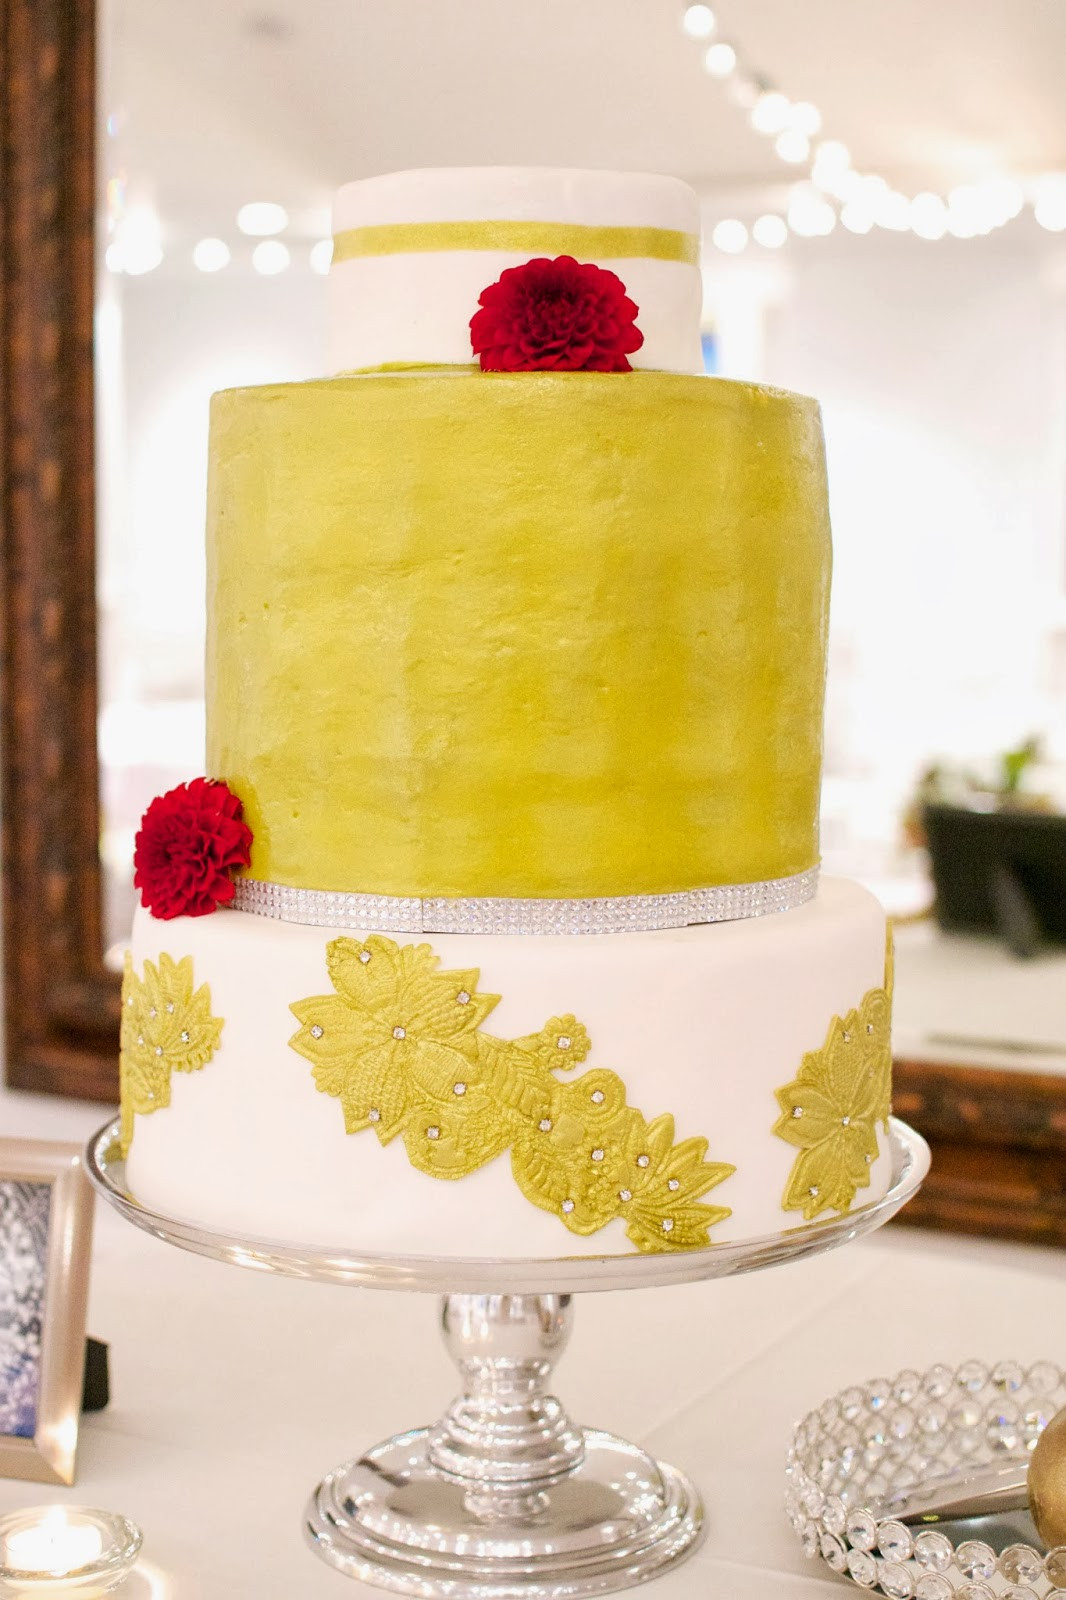 Wedding Cakes Utah County
 THE MIGHTY BAKER Gold Wedding Cake & Delicious Dessert